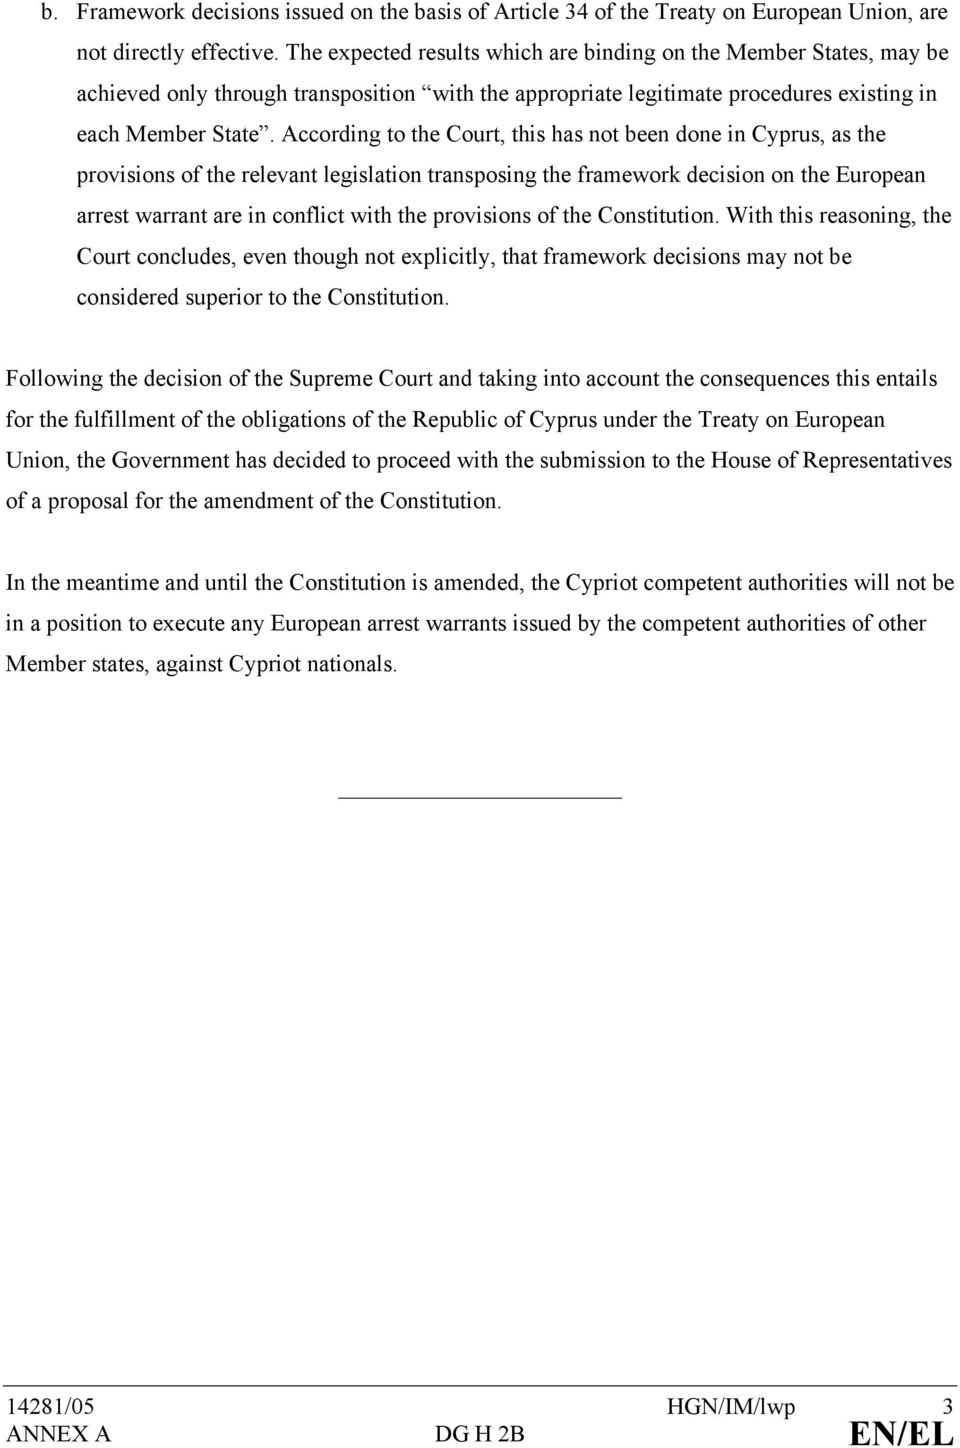 According to the Court, this has not been done in Cyprus, as the provisions of the relevant legislation transposing the framework decision on the European arrest warrant are in conflict with the